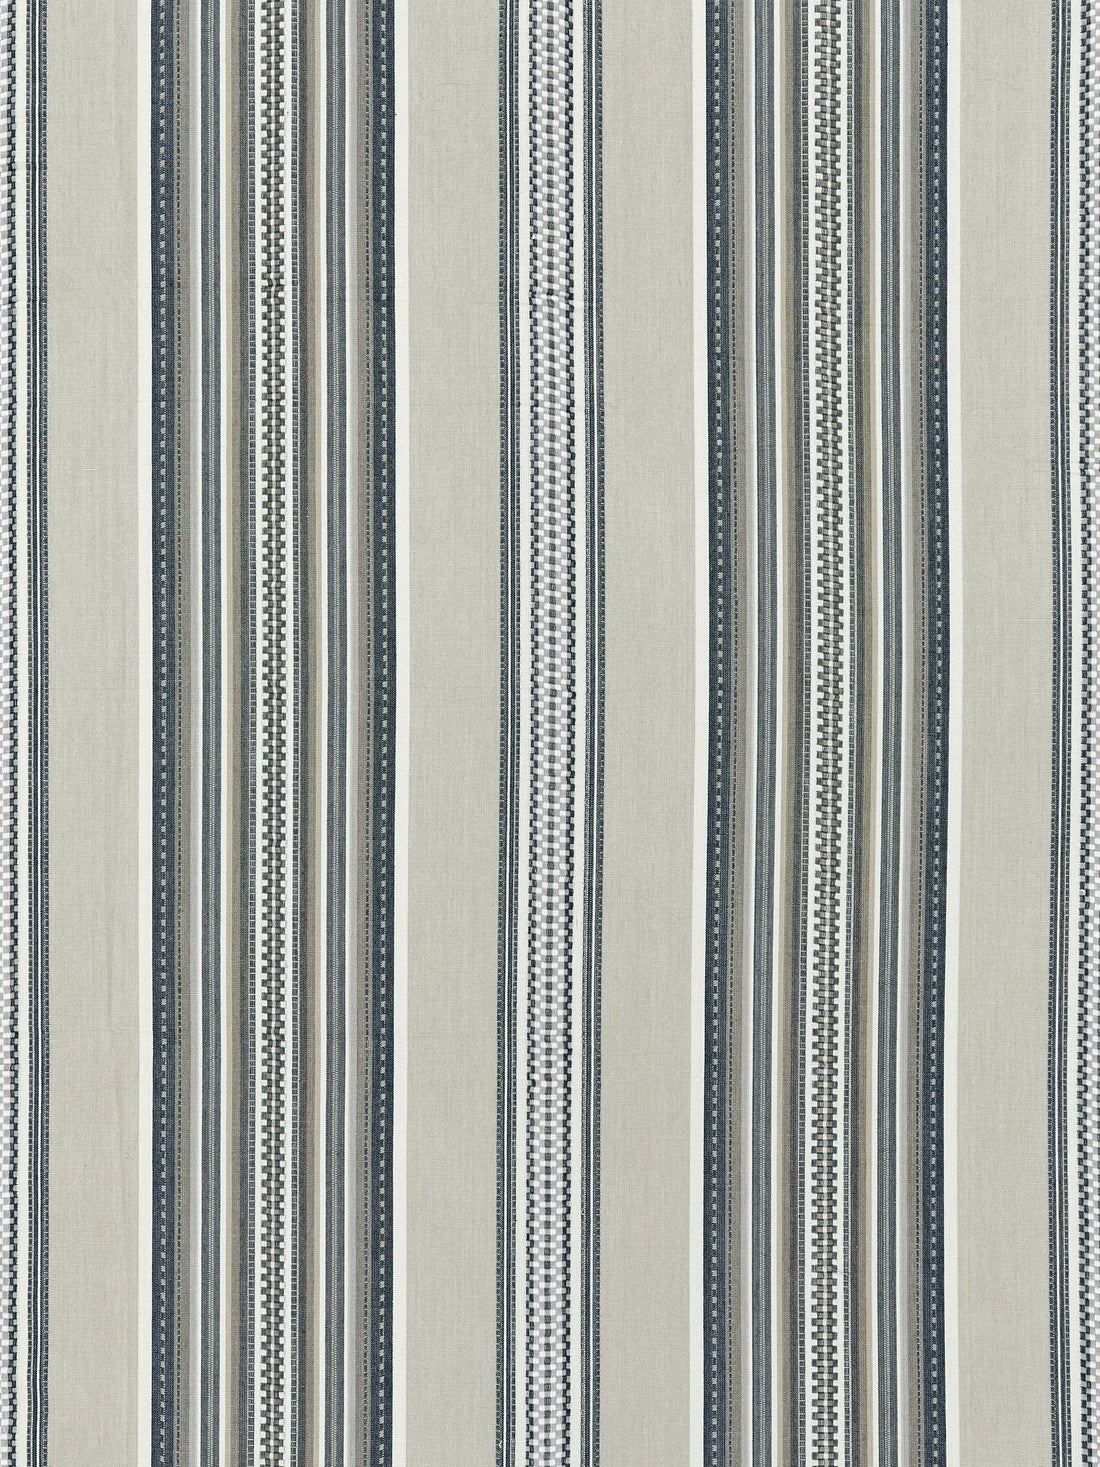 Cyrus Cotton Stripe fabric in stone color - pattern number SC 000327180 - by Scalamandre in the Scalamandre Fabrics Book 1 collection